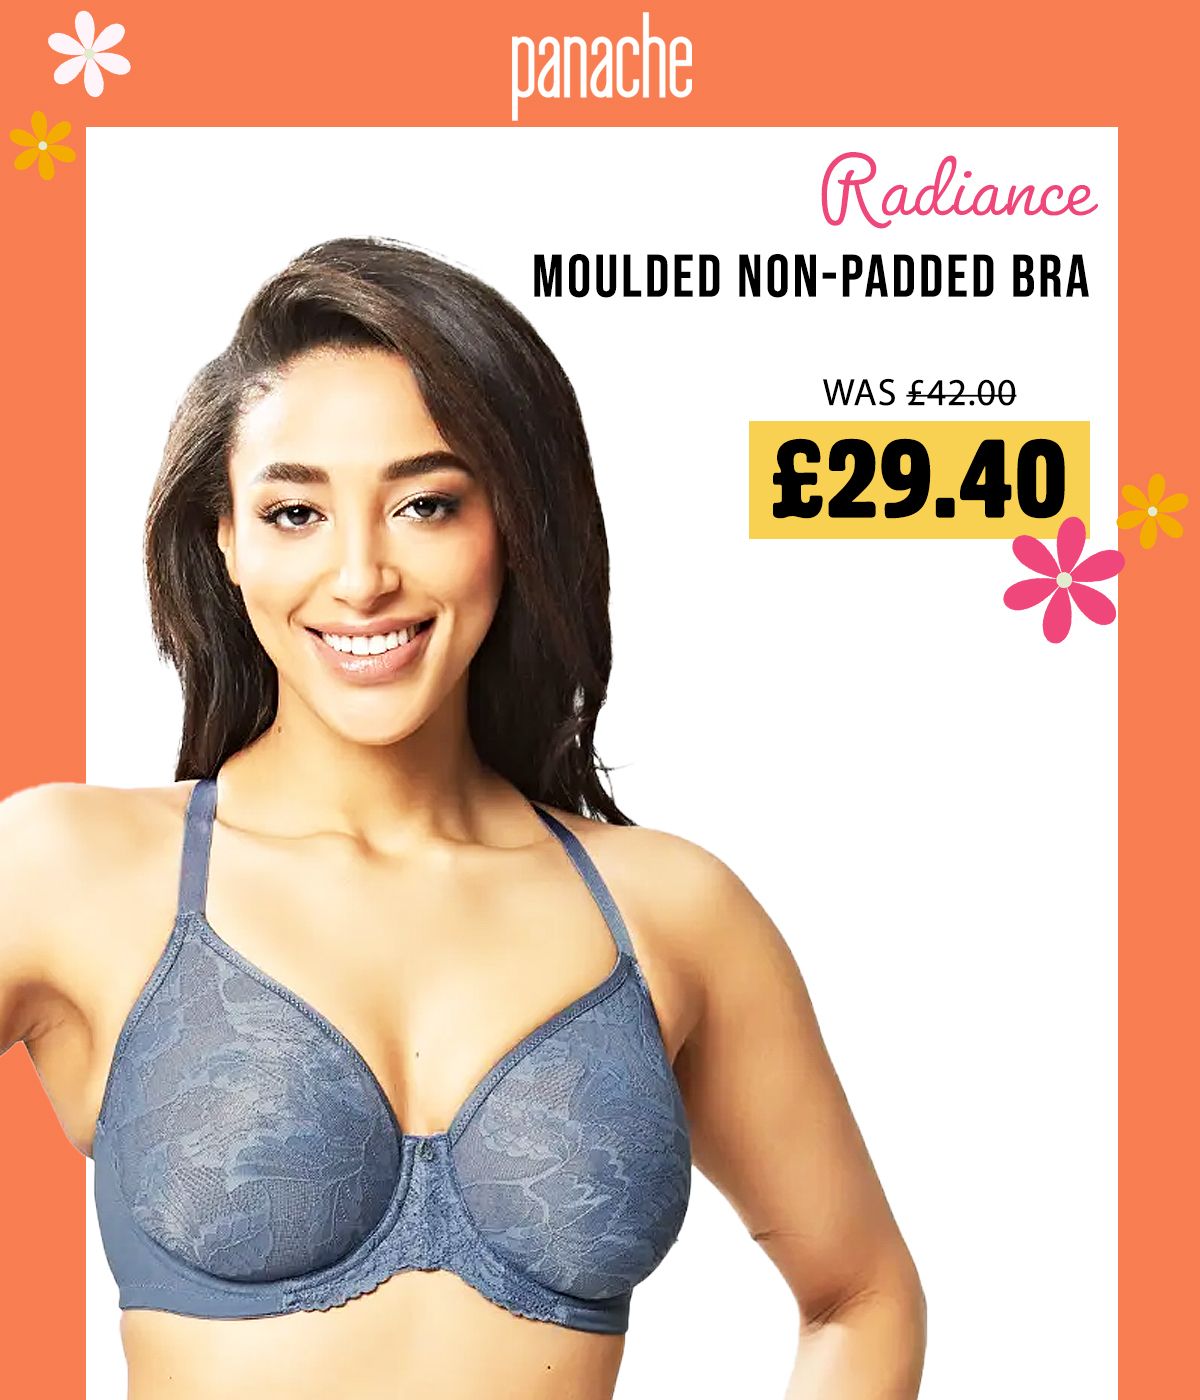 Radiance moulded non-padded bra